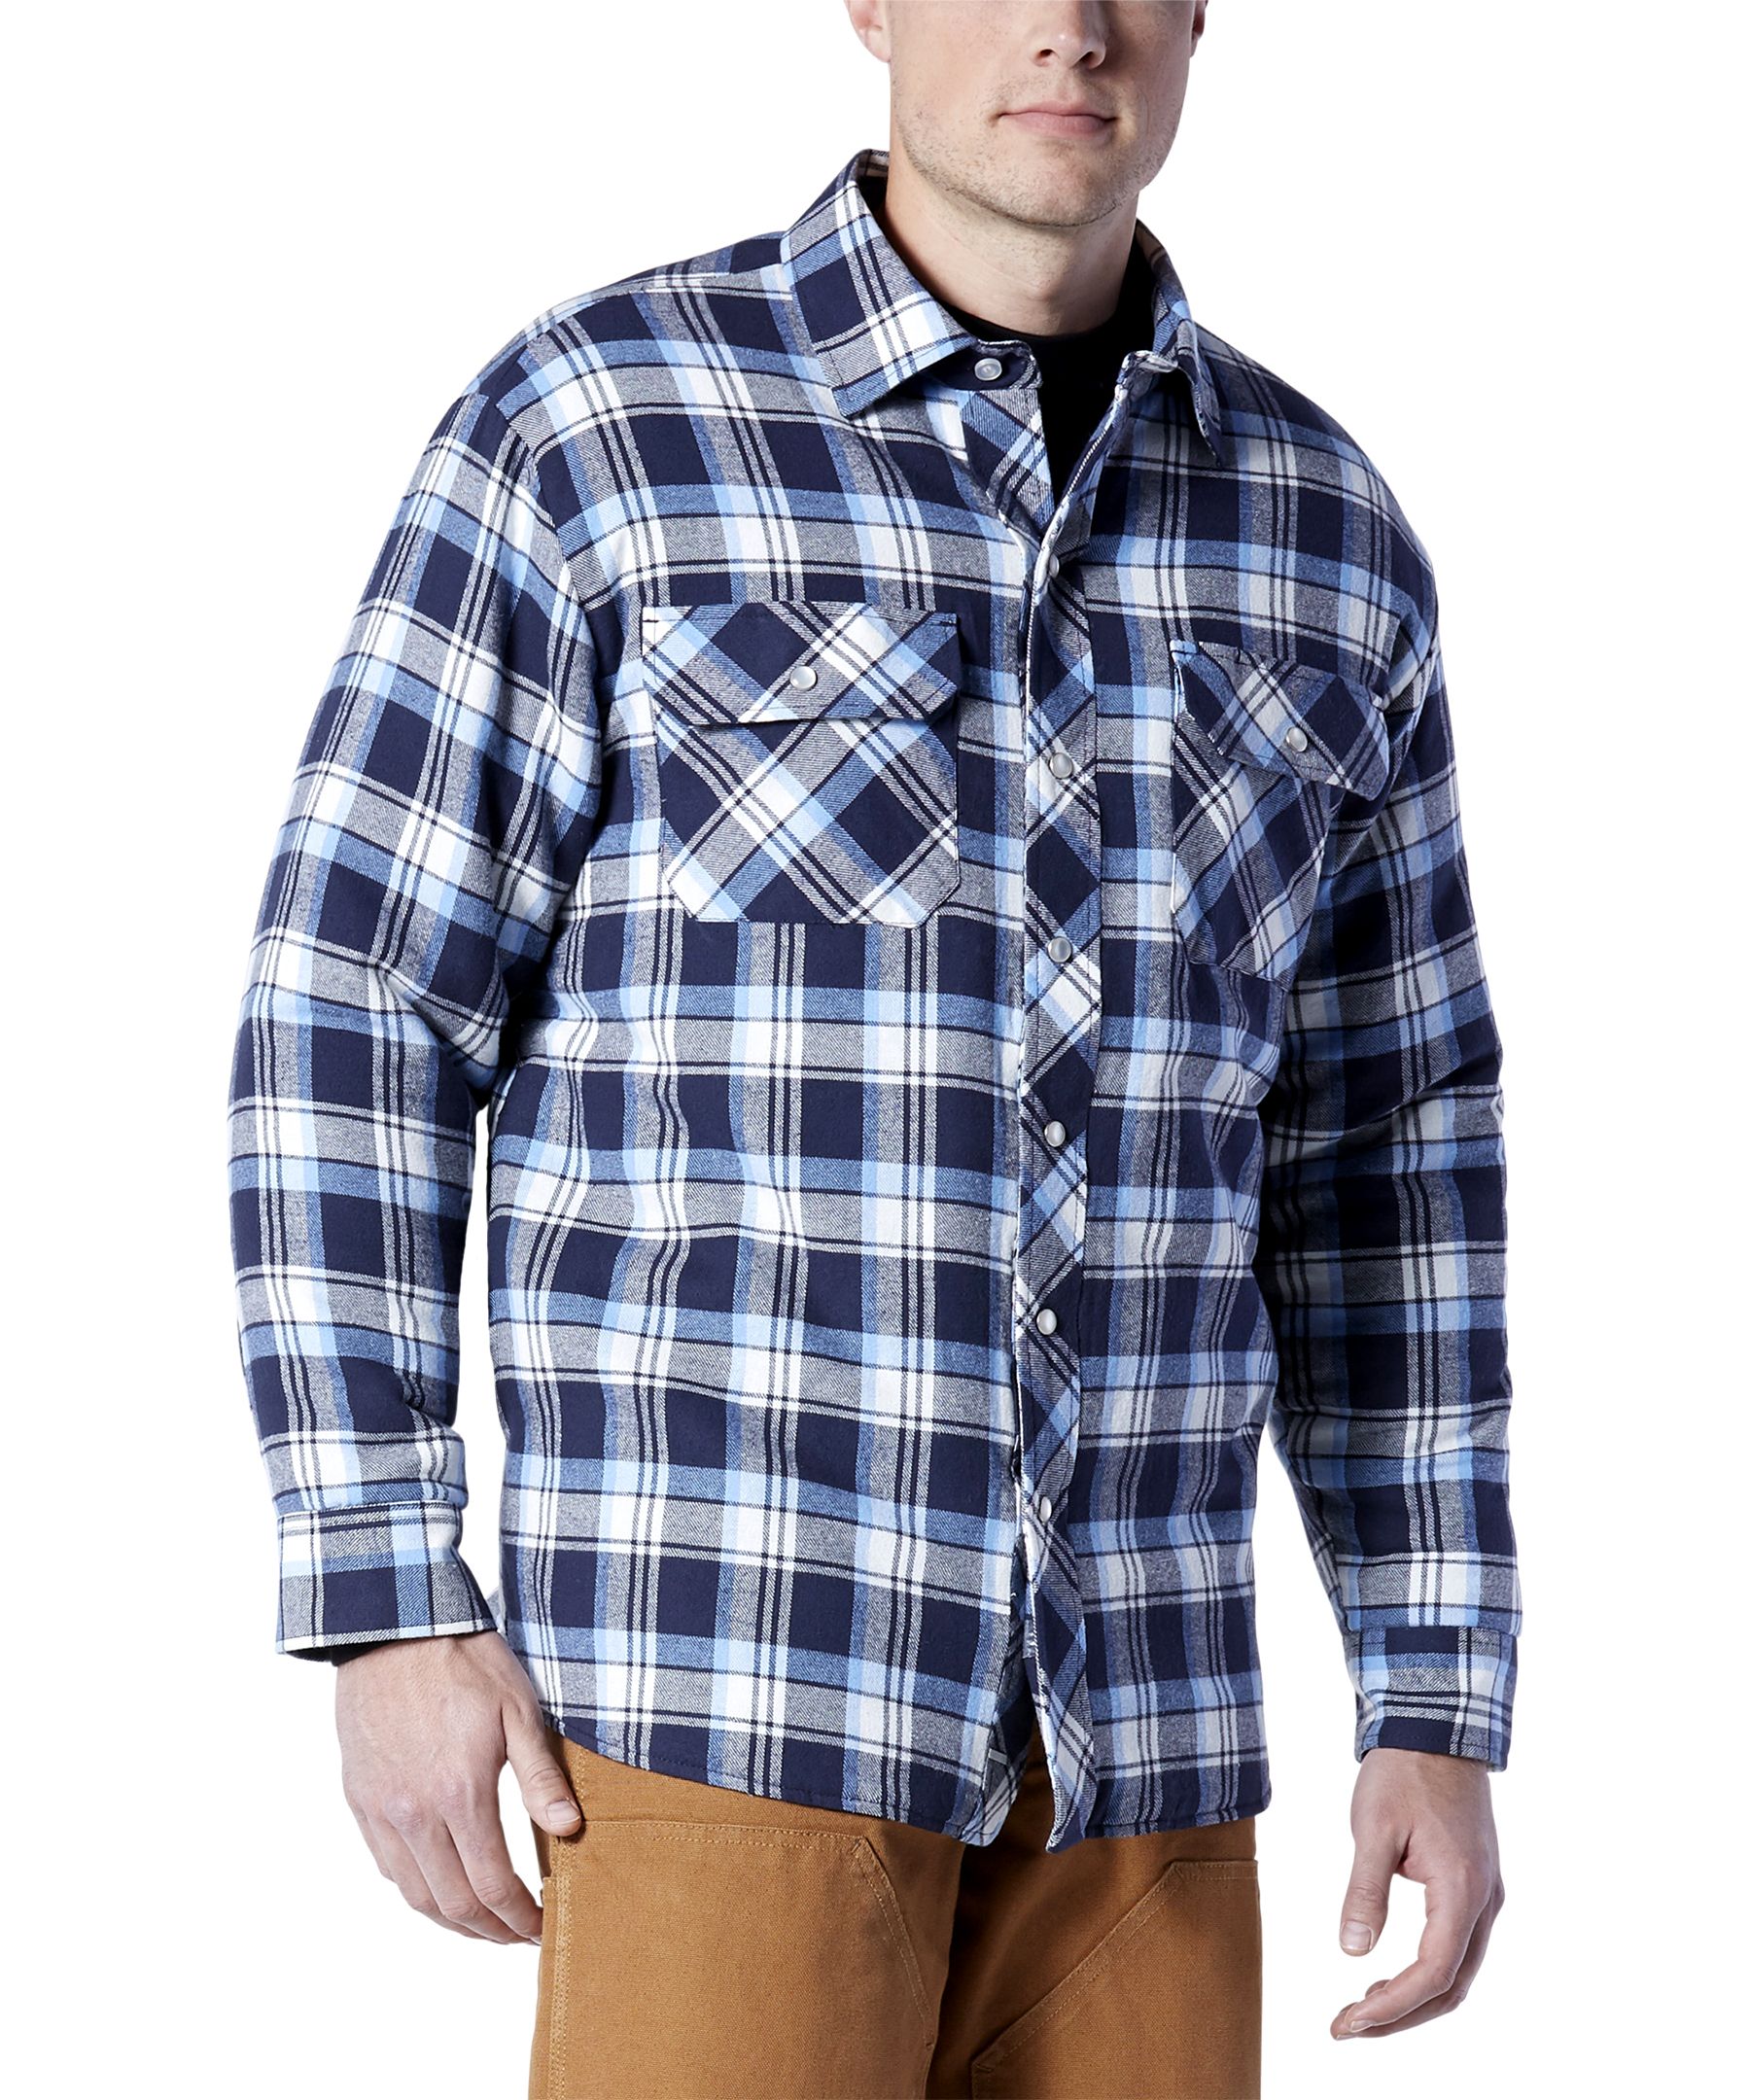 Aggressor Men's Snap-Front Plaid Quilted Flannel Work Shirt